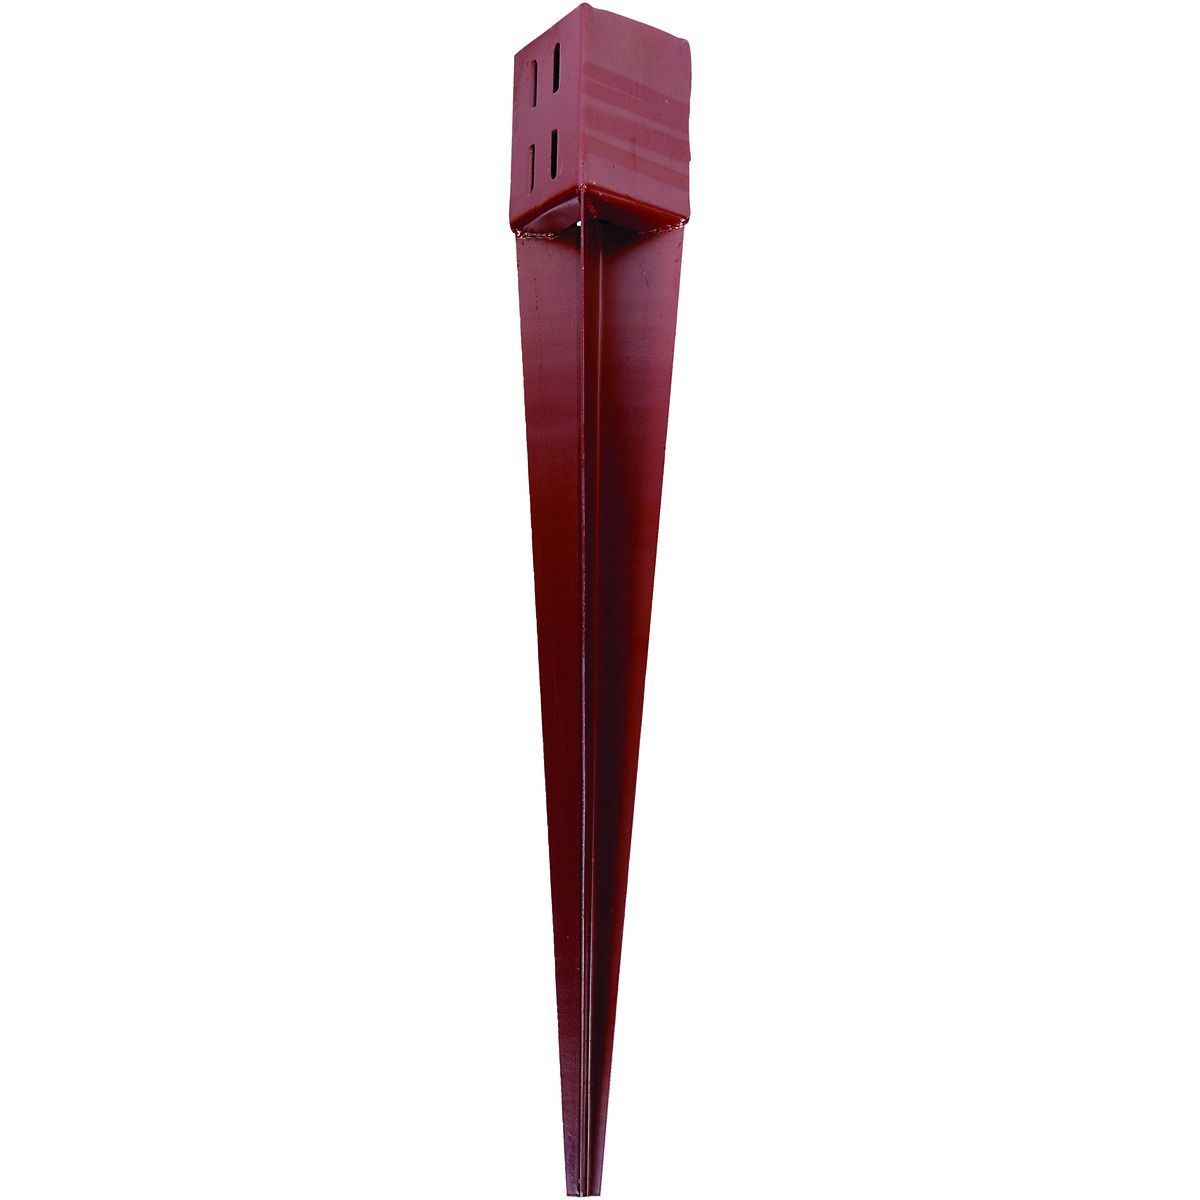 Image of Wickes Wedge 750mm Support Spike for Fence Posts - 100 x 100mm